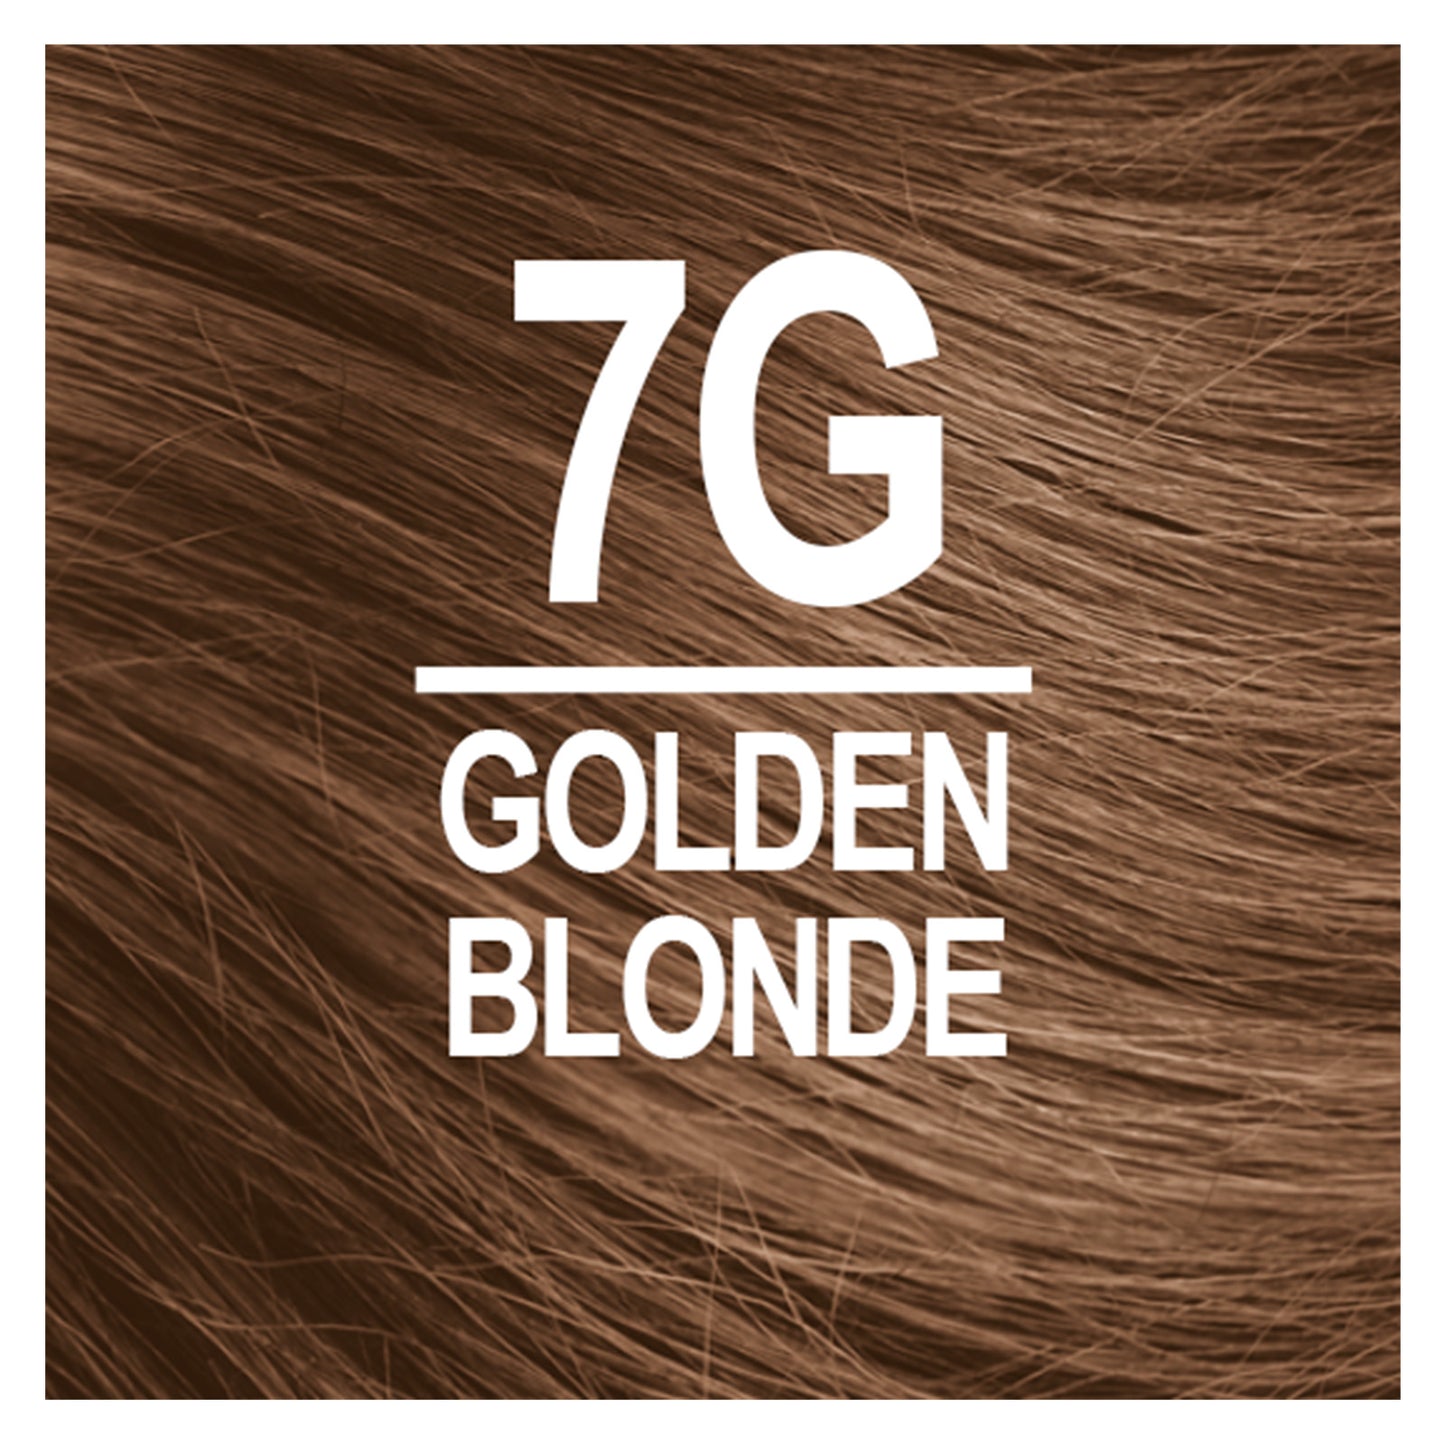 Naturtint Permanent Hair Color 7G Golden Blonde (Packaging may vary)